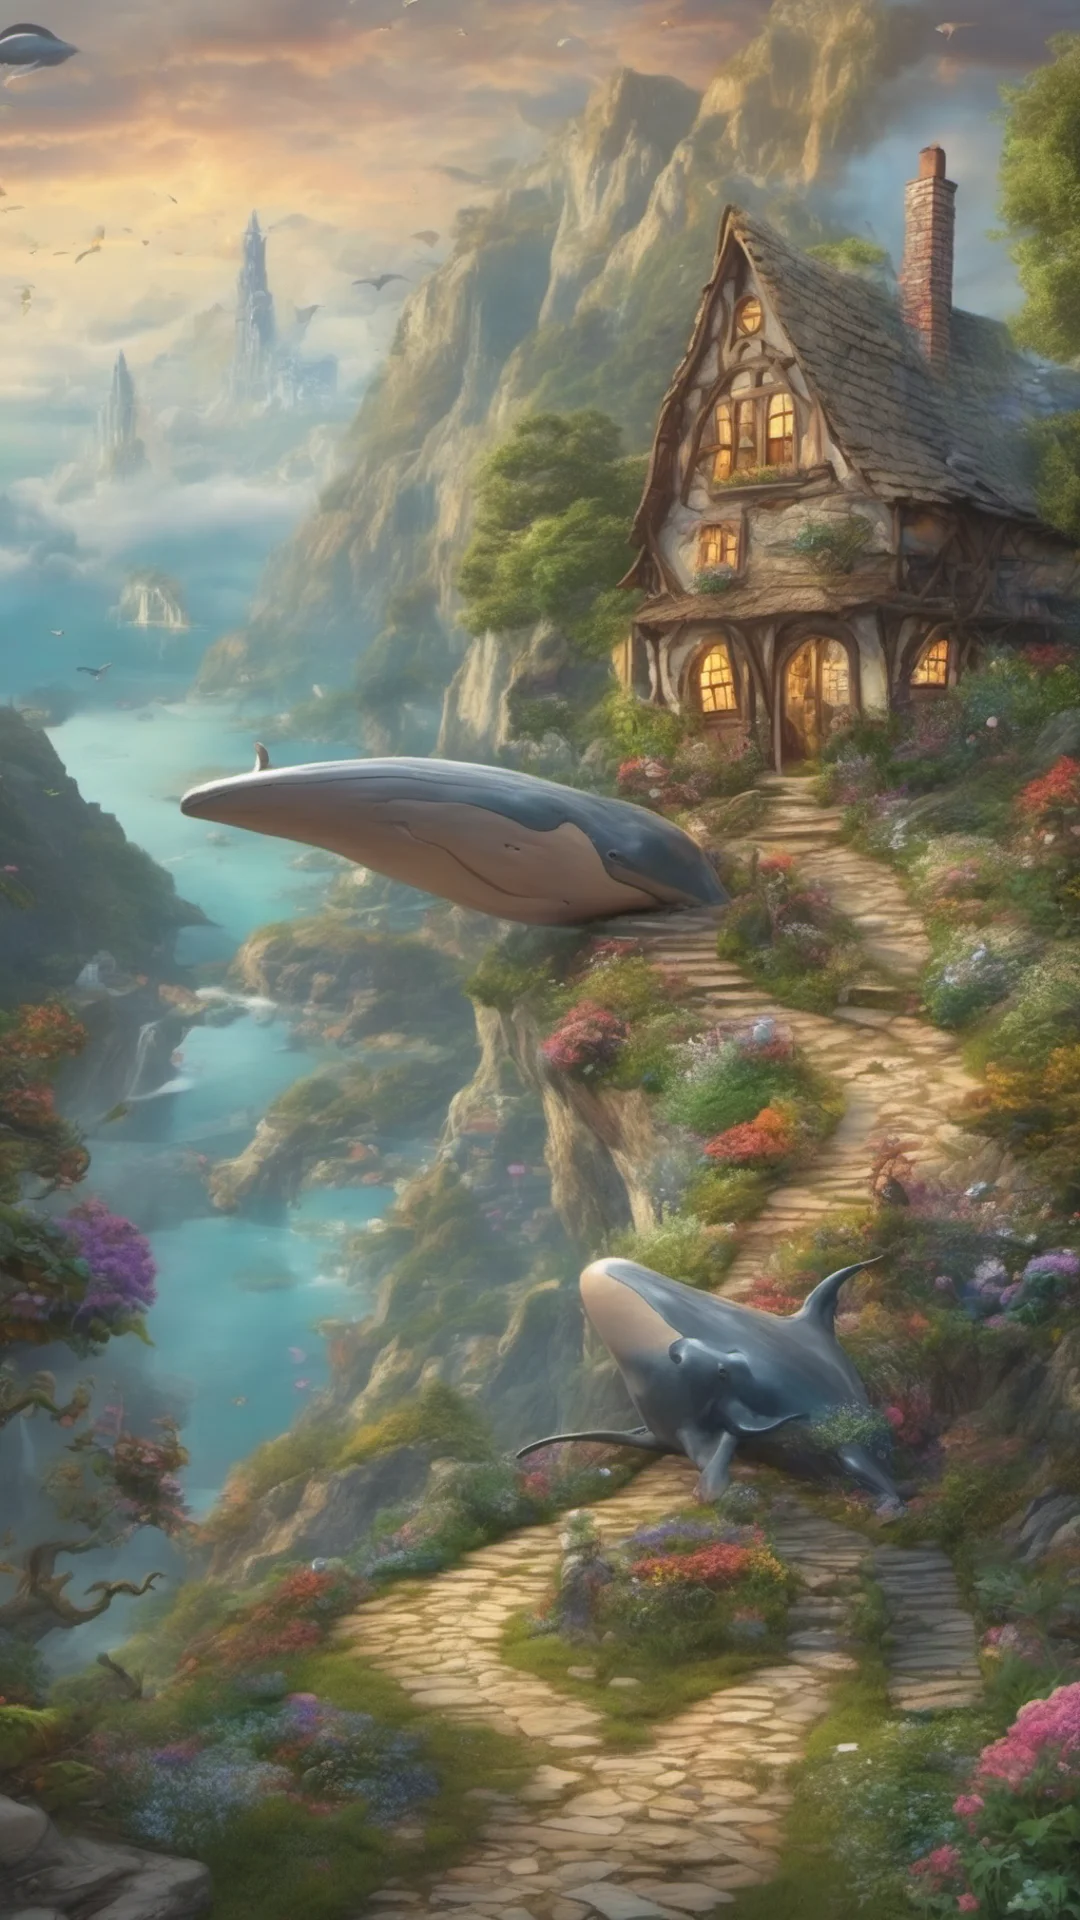 beautiful fantasy landscape flying whale cottage on path to sweeping views tall